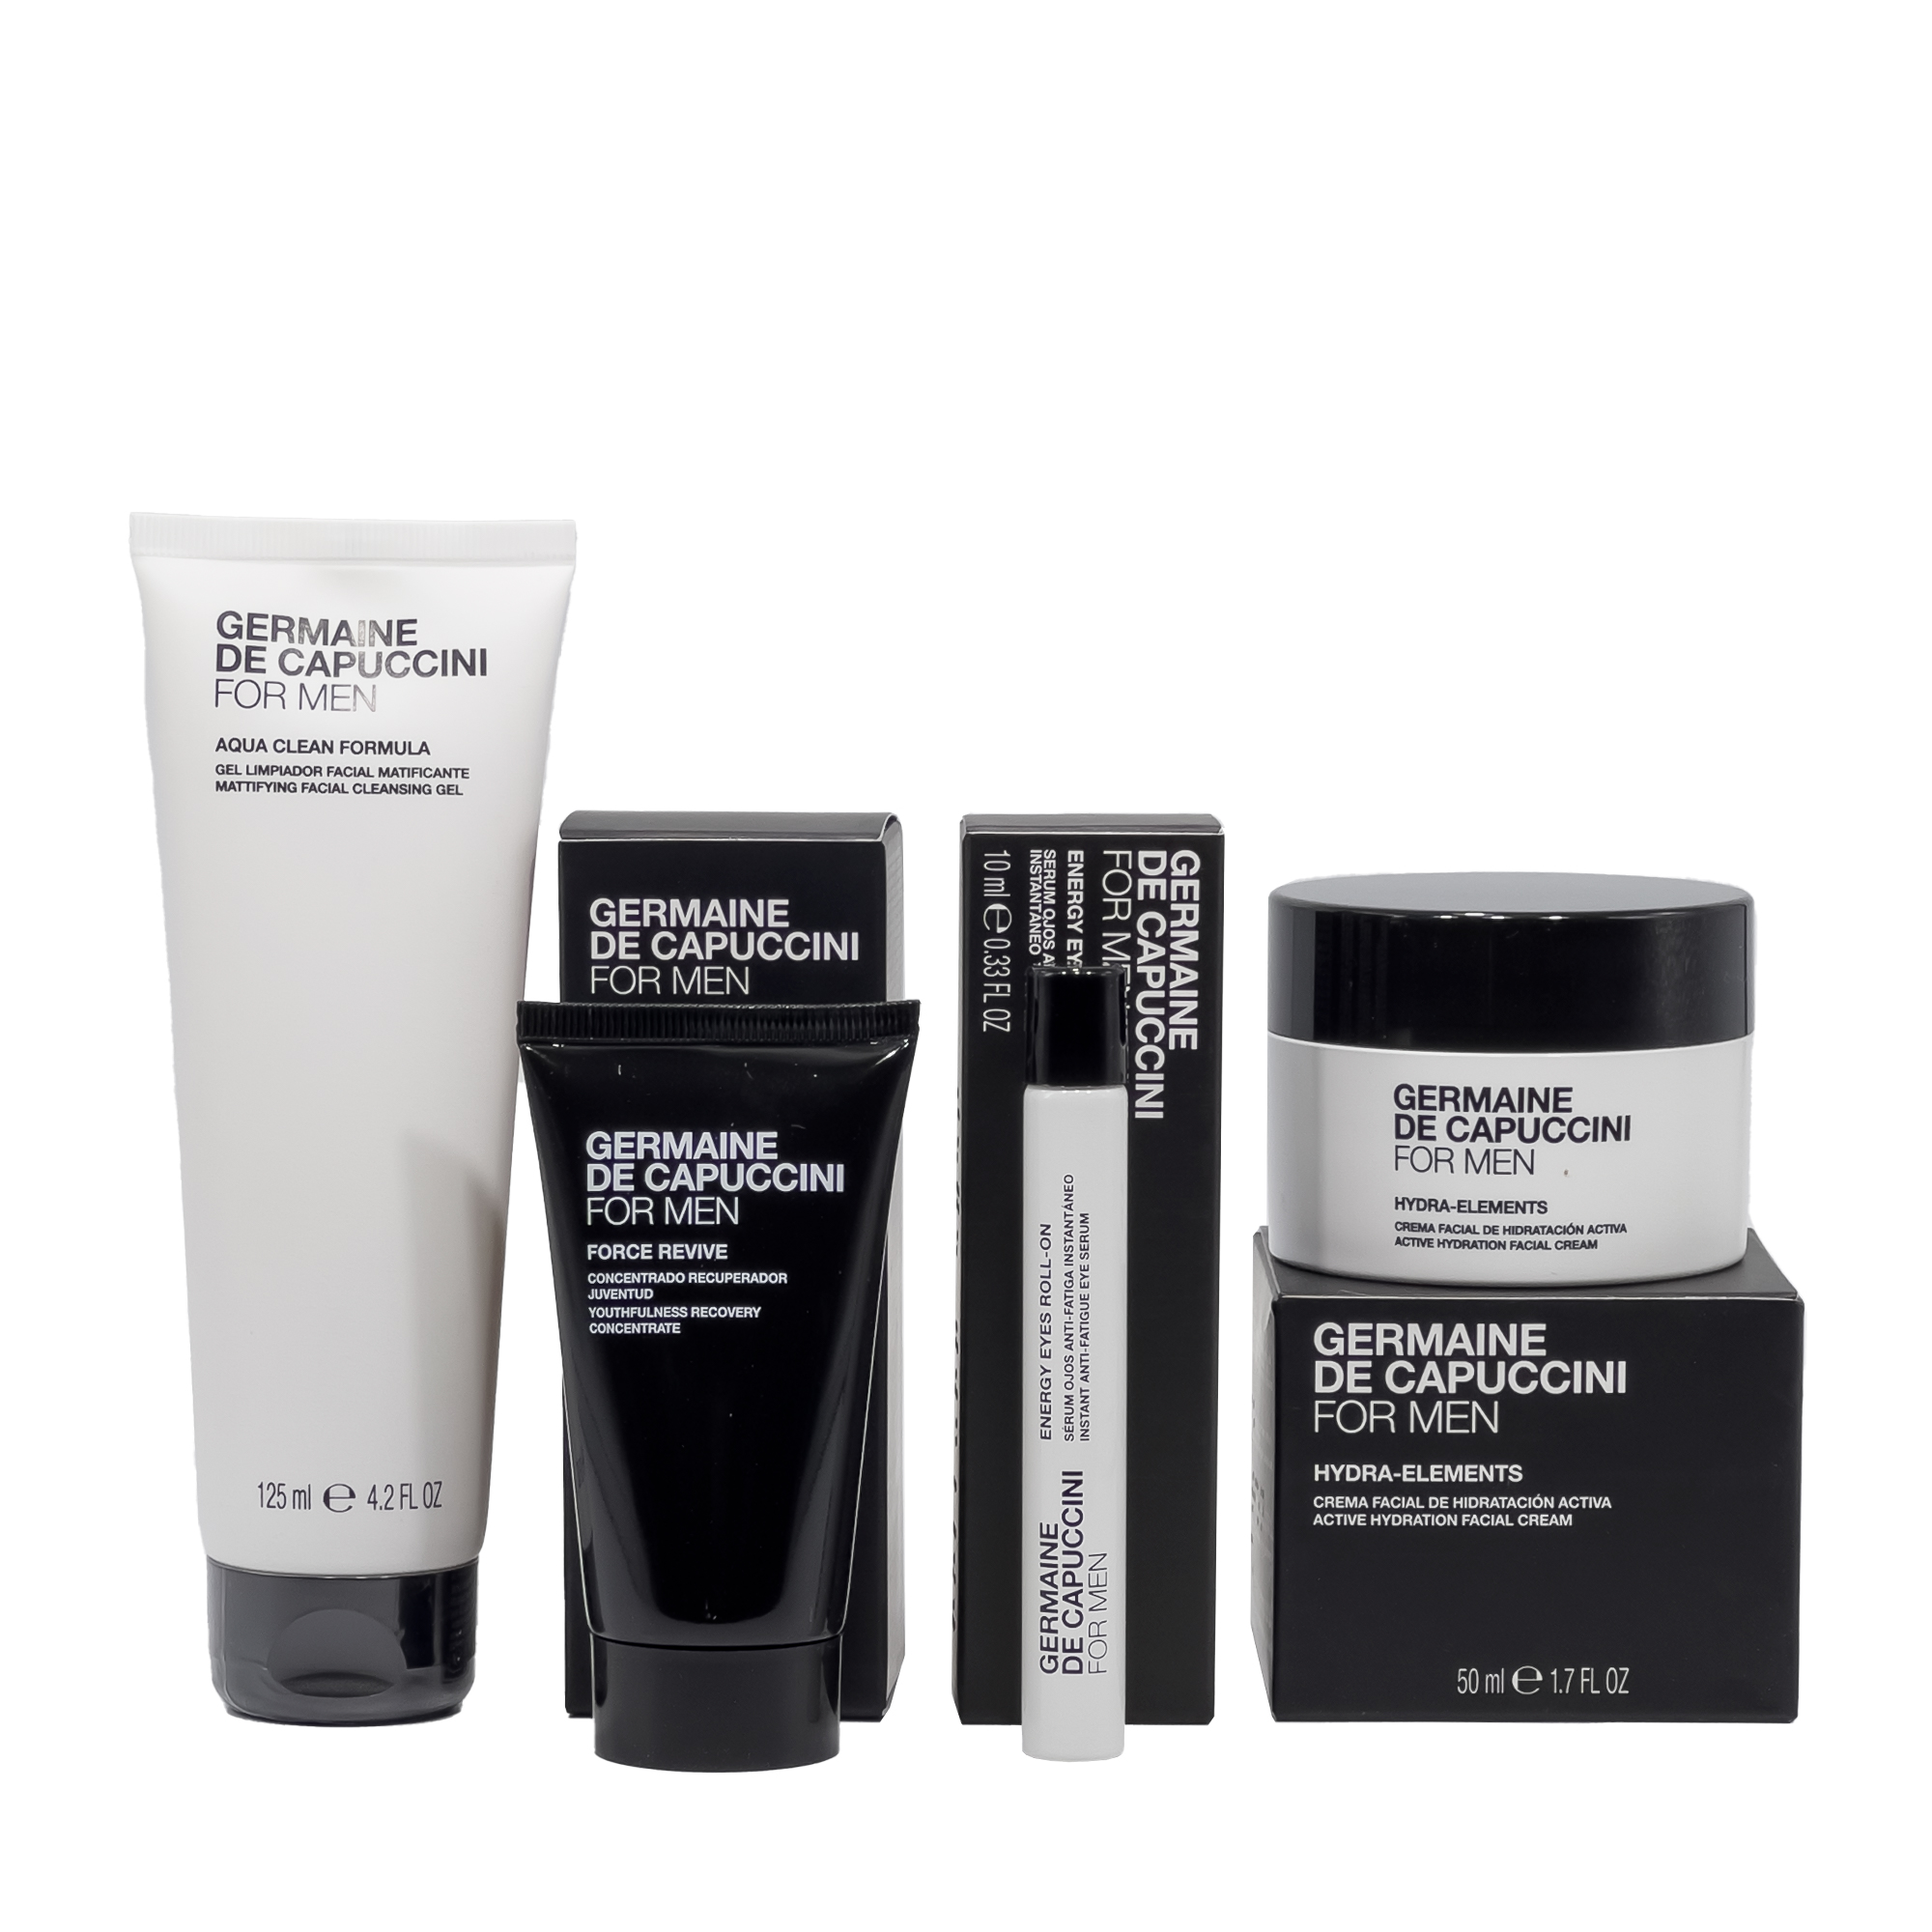 Germaine de Capuccini Daily Routine Pack - Nicehair.com